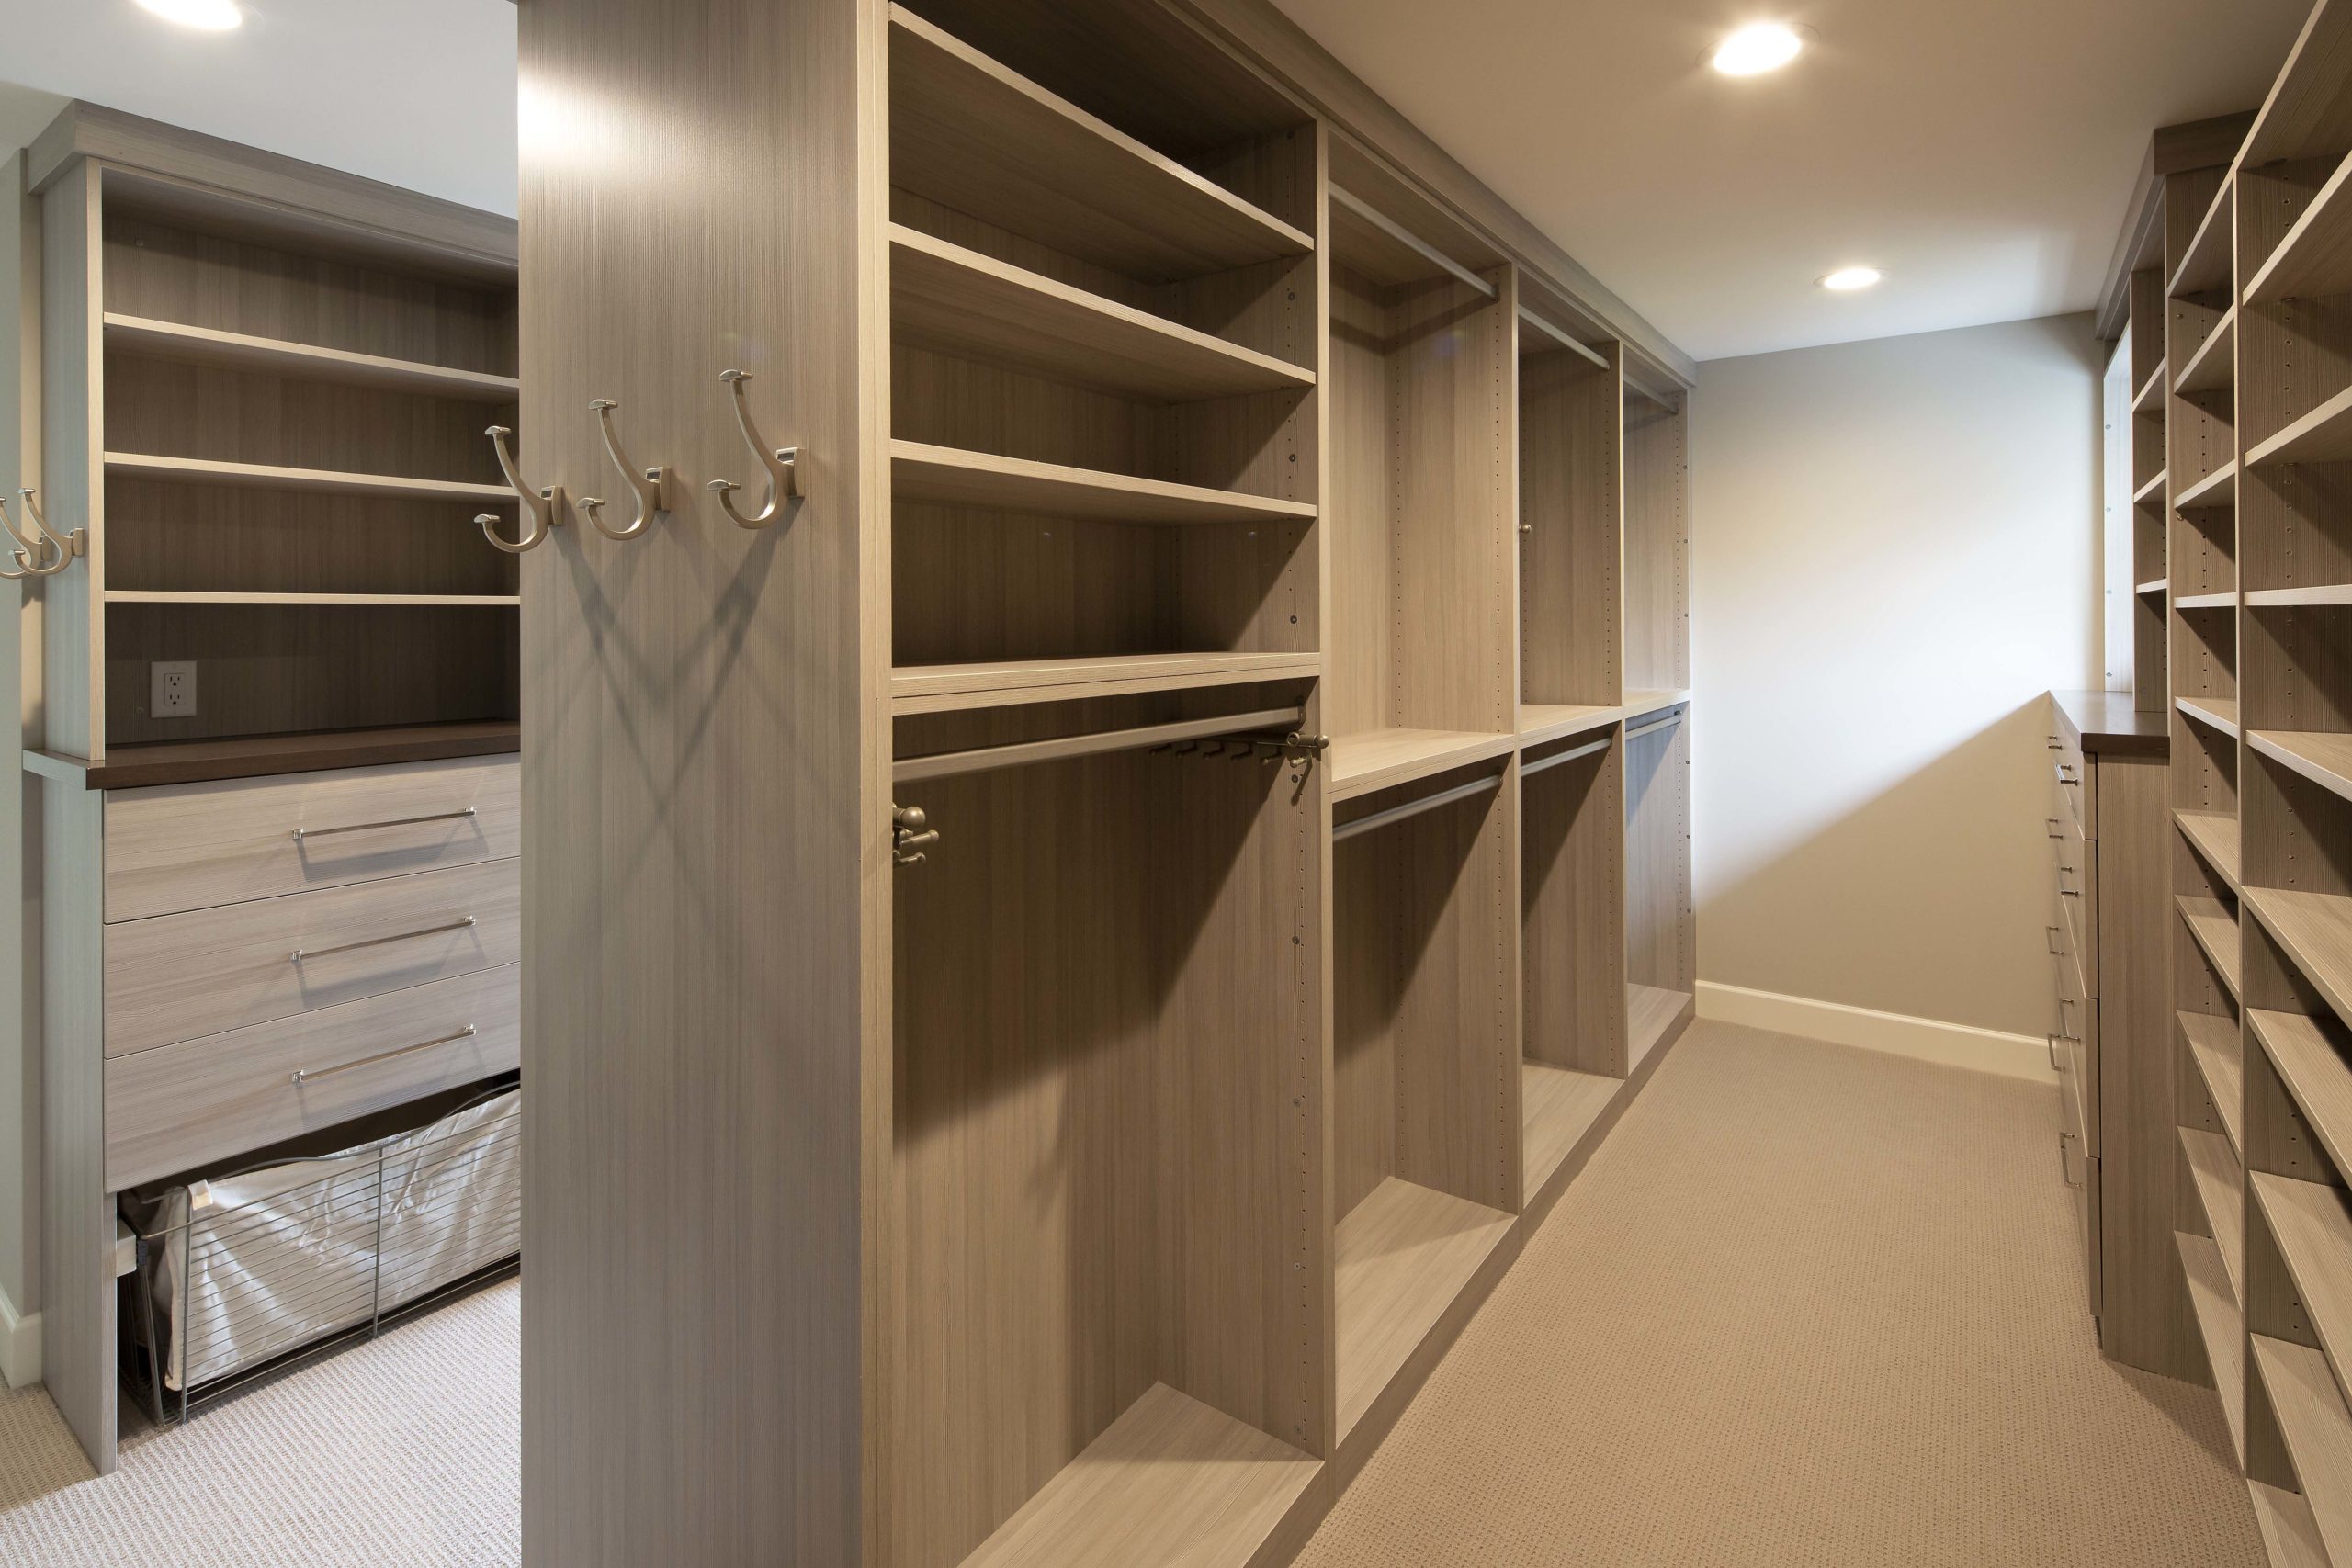 A walk in closet with shelves and drawers.